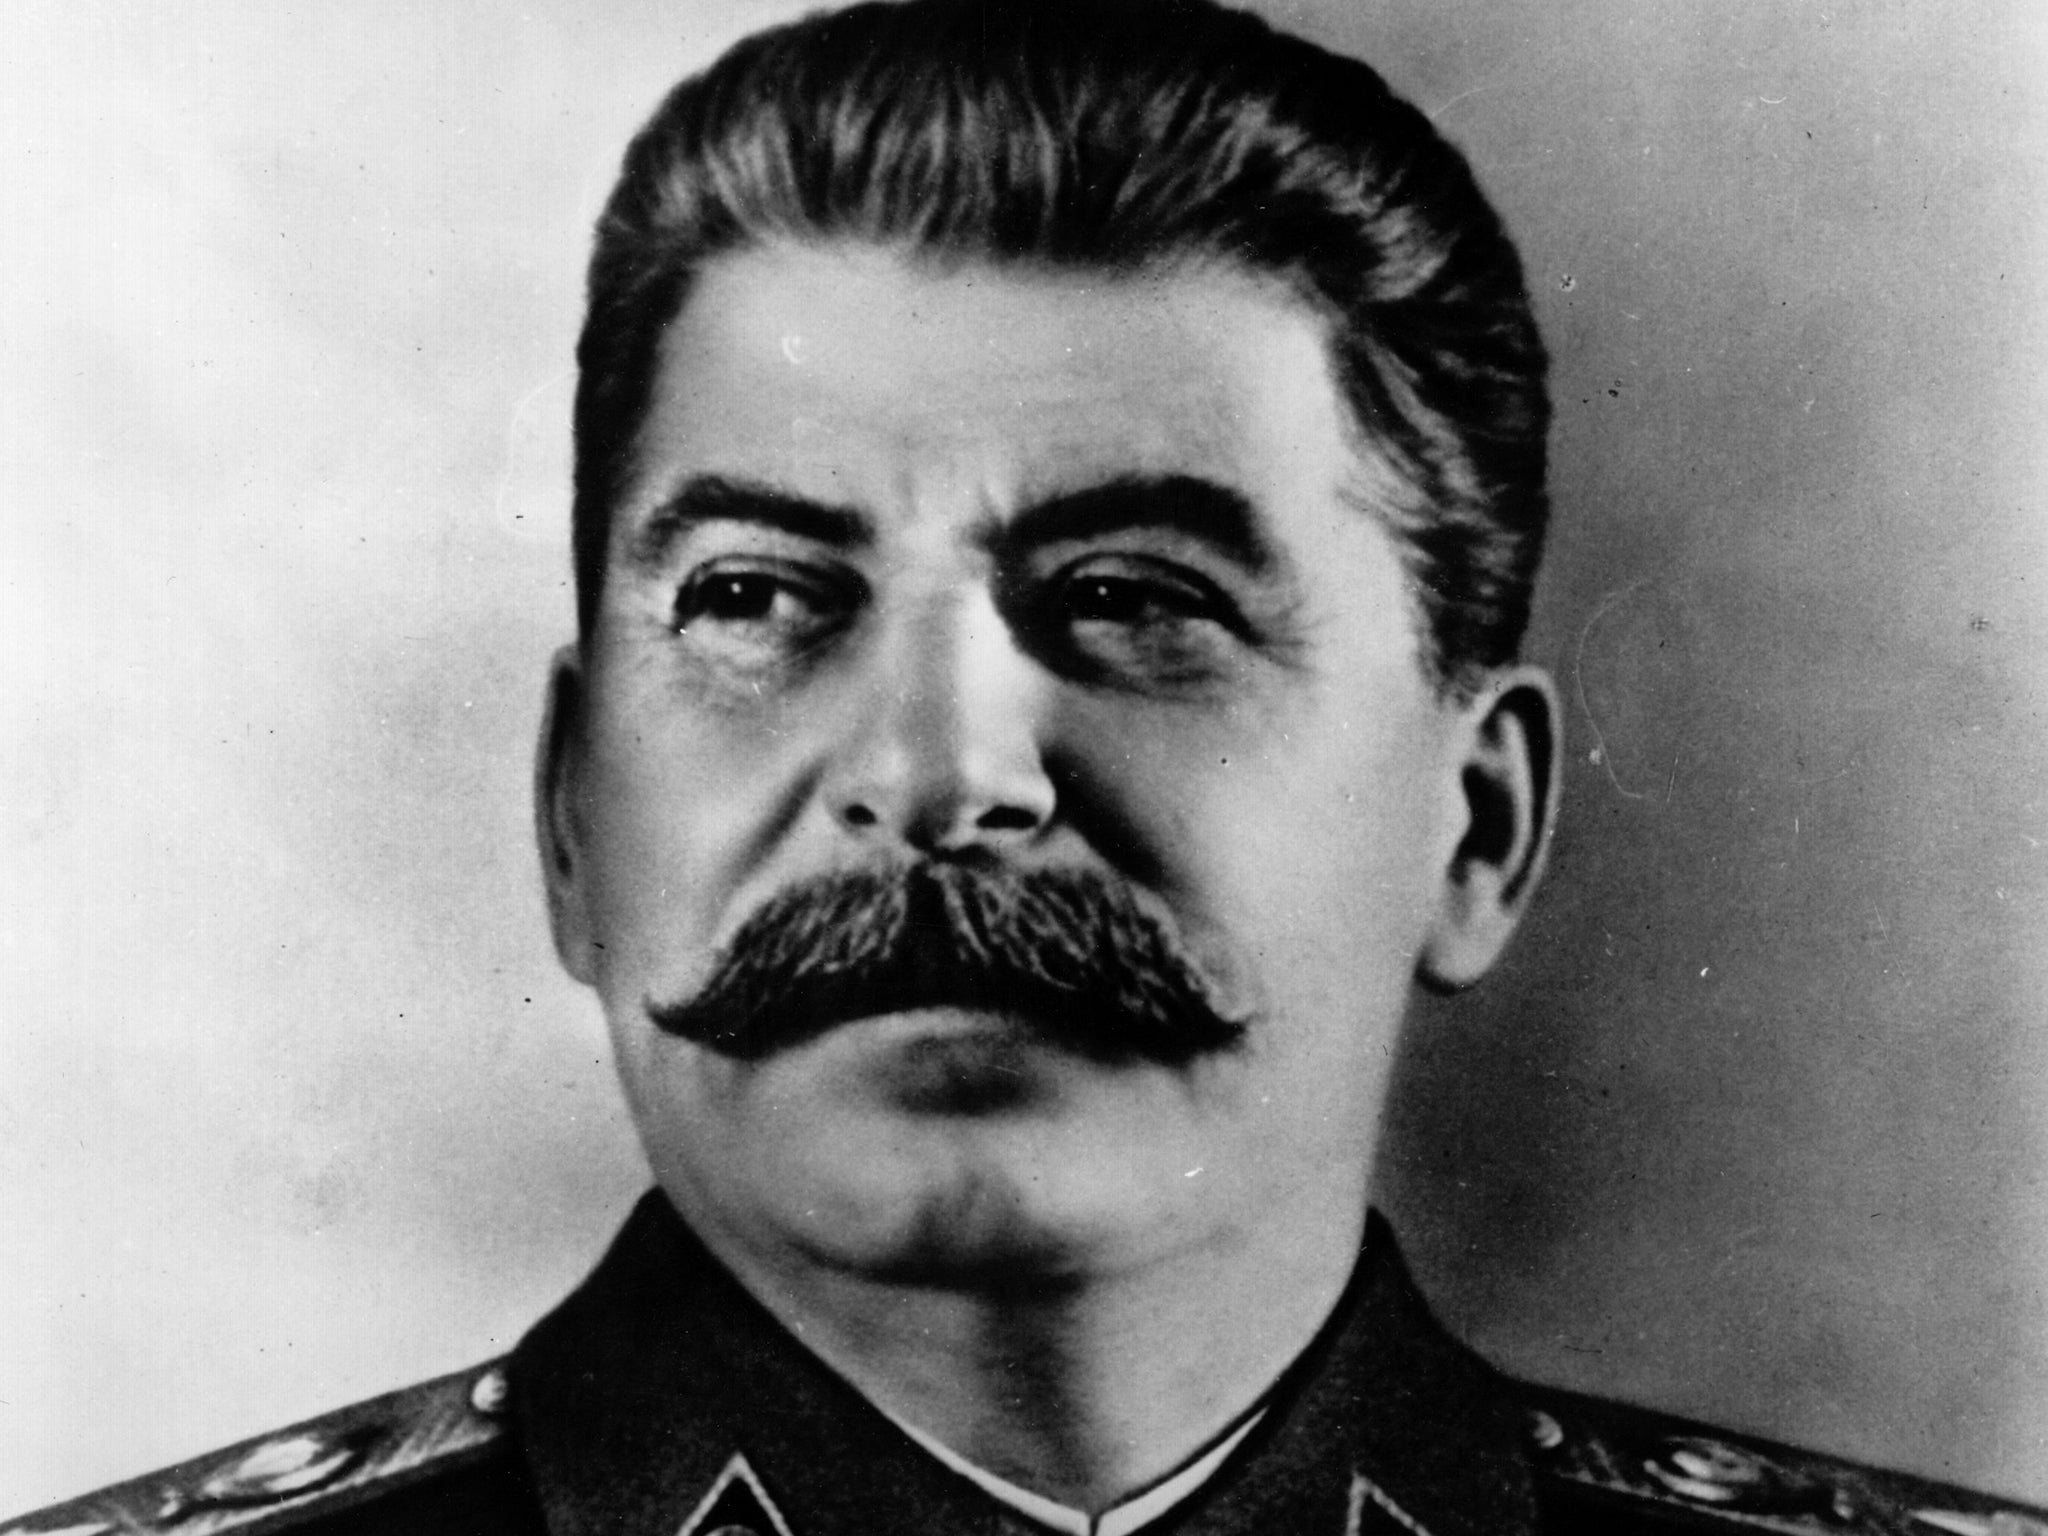 The new plan for the museum leaves “no talk of Stalin”